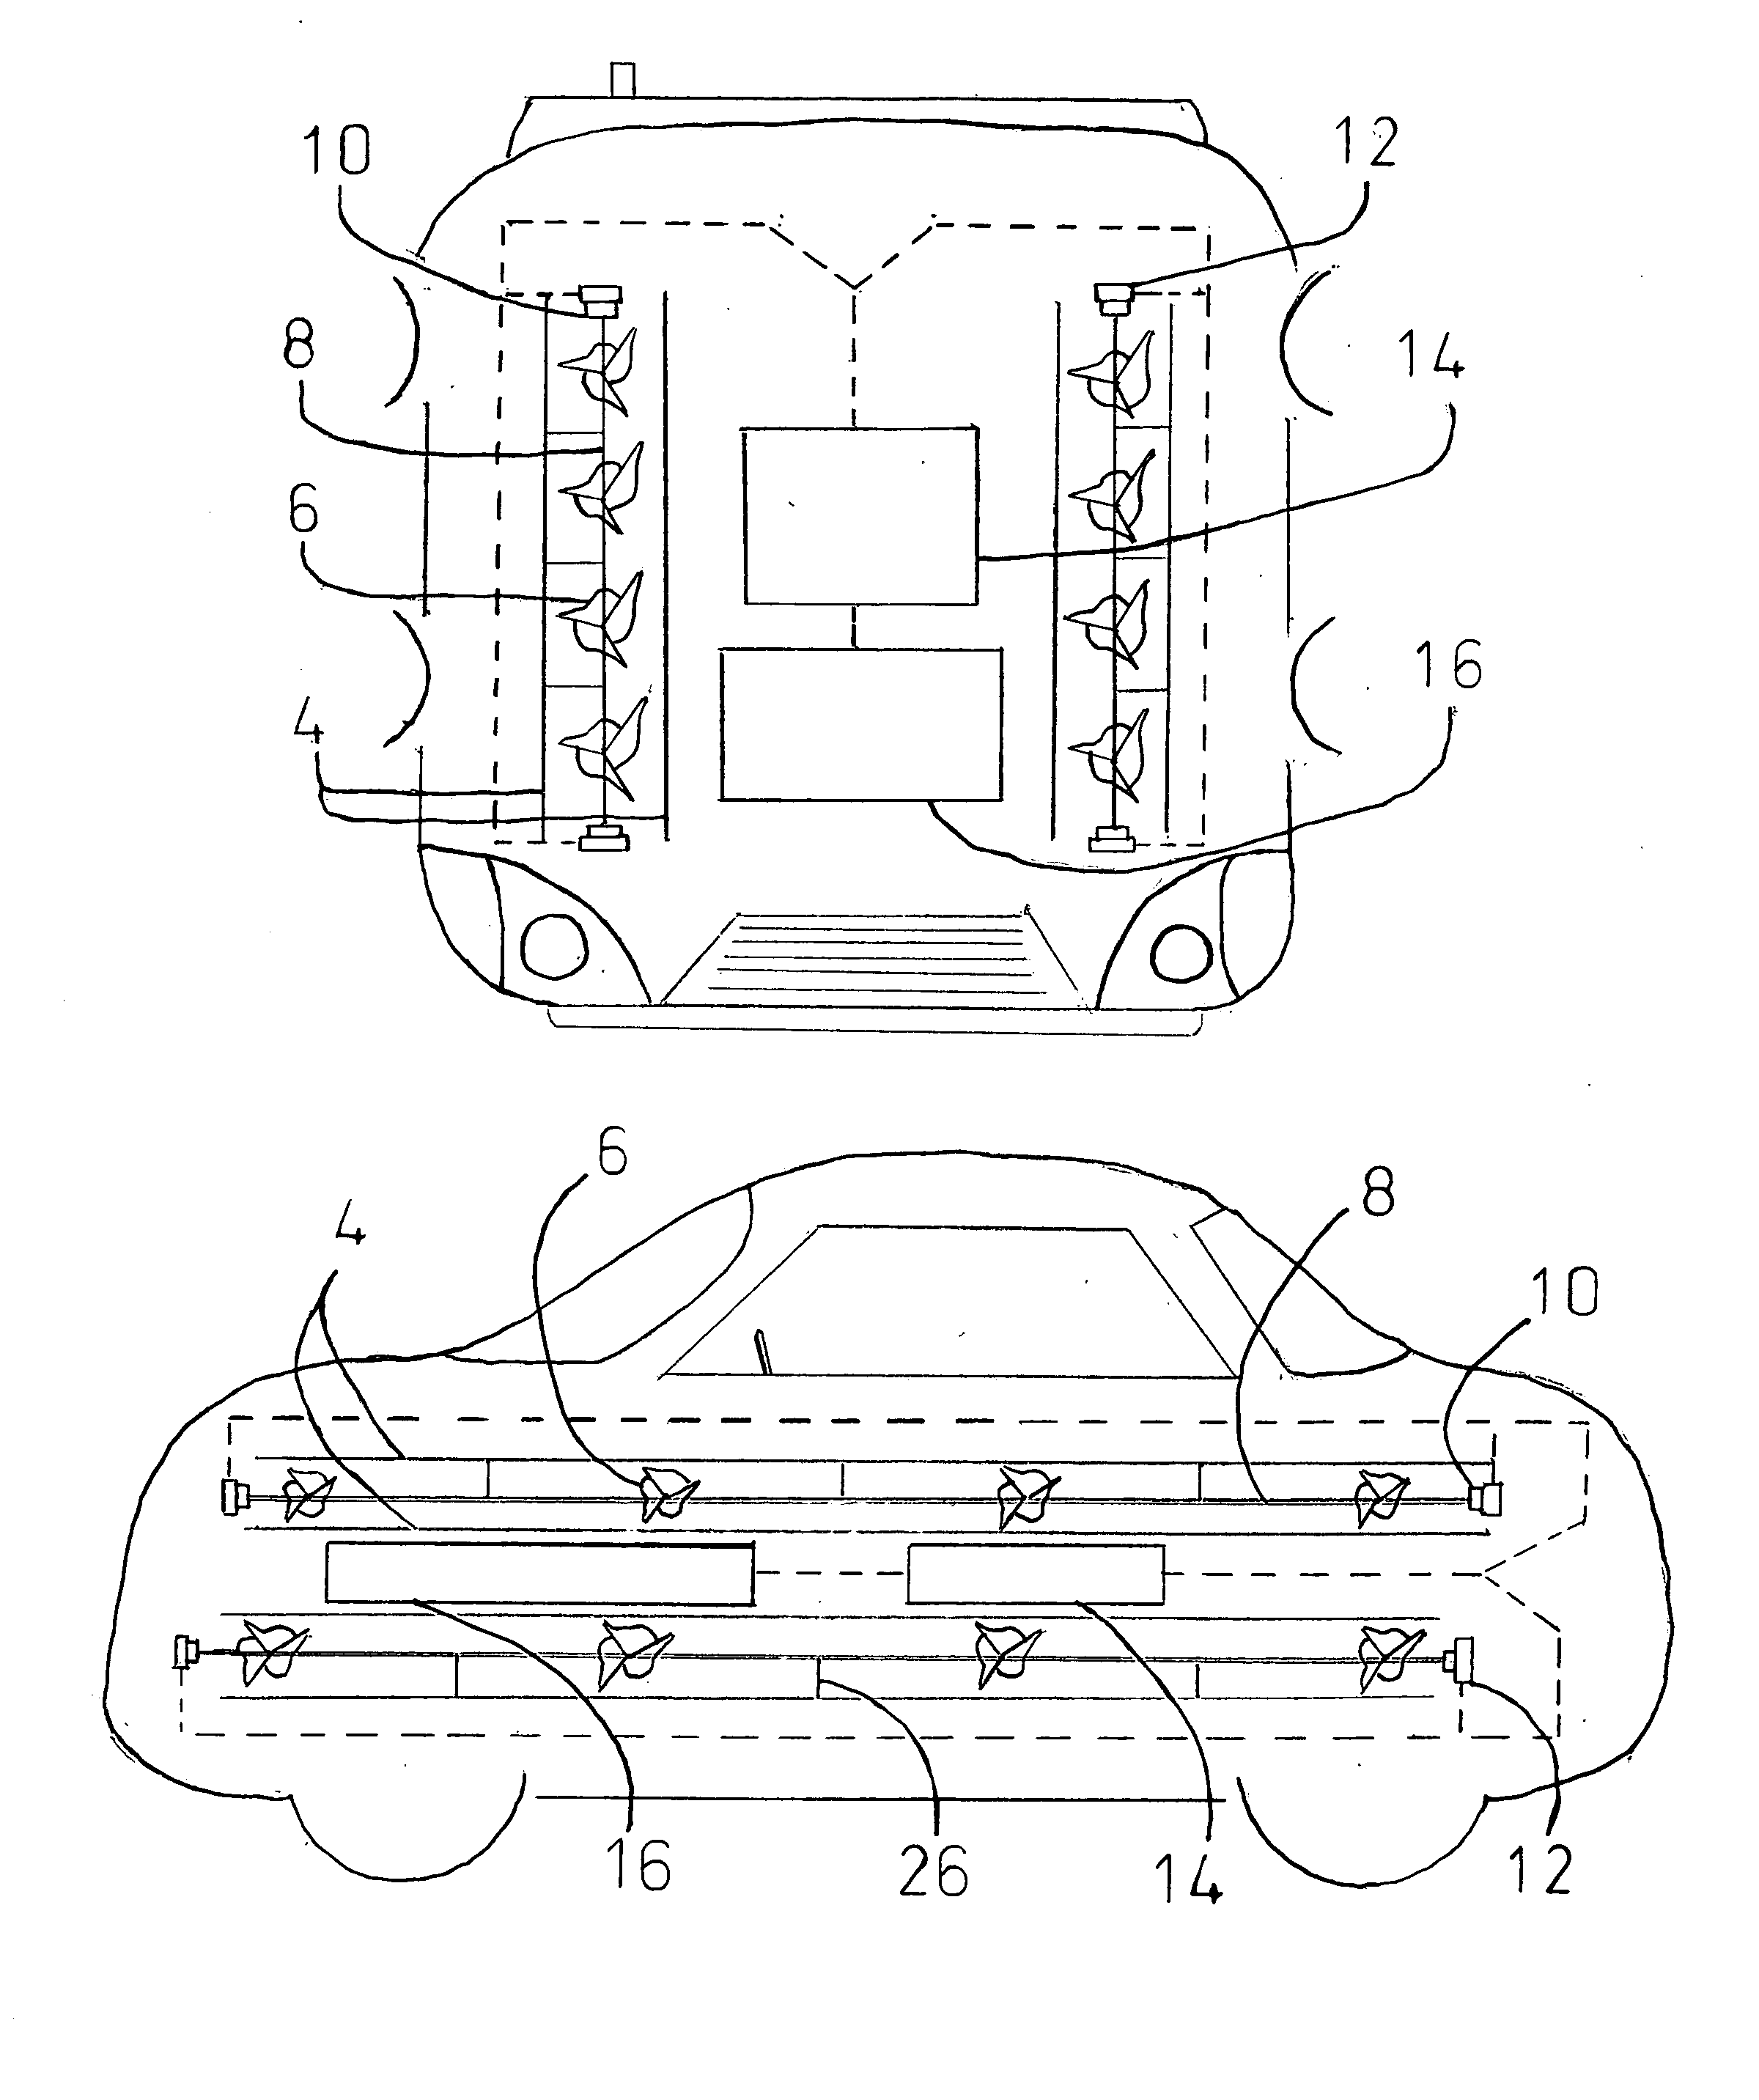 Air / wind tunnel powered turbine, electric power recharging system